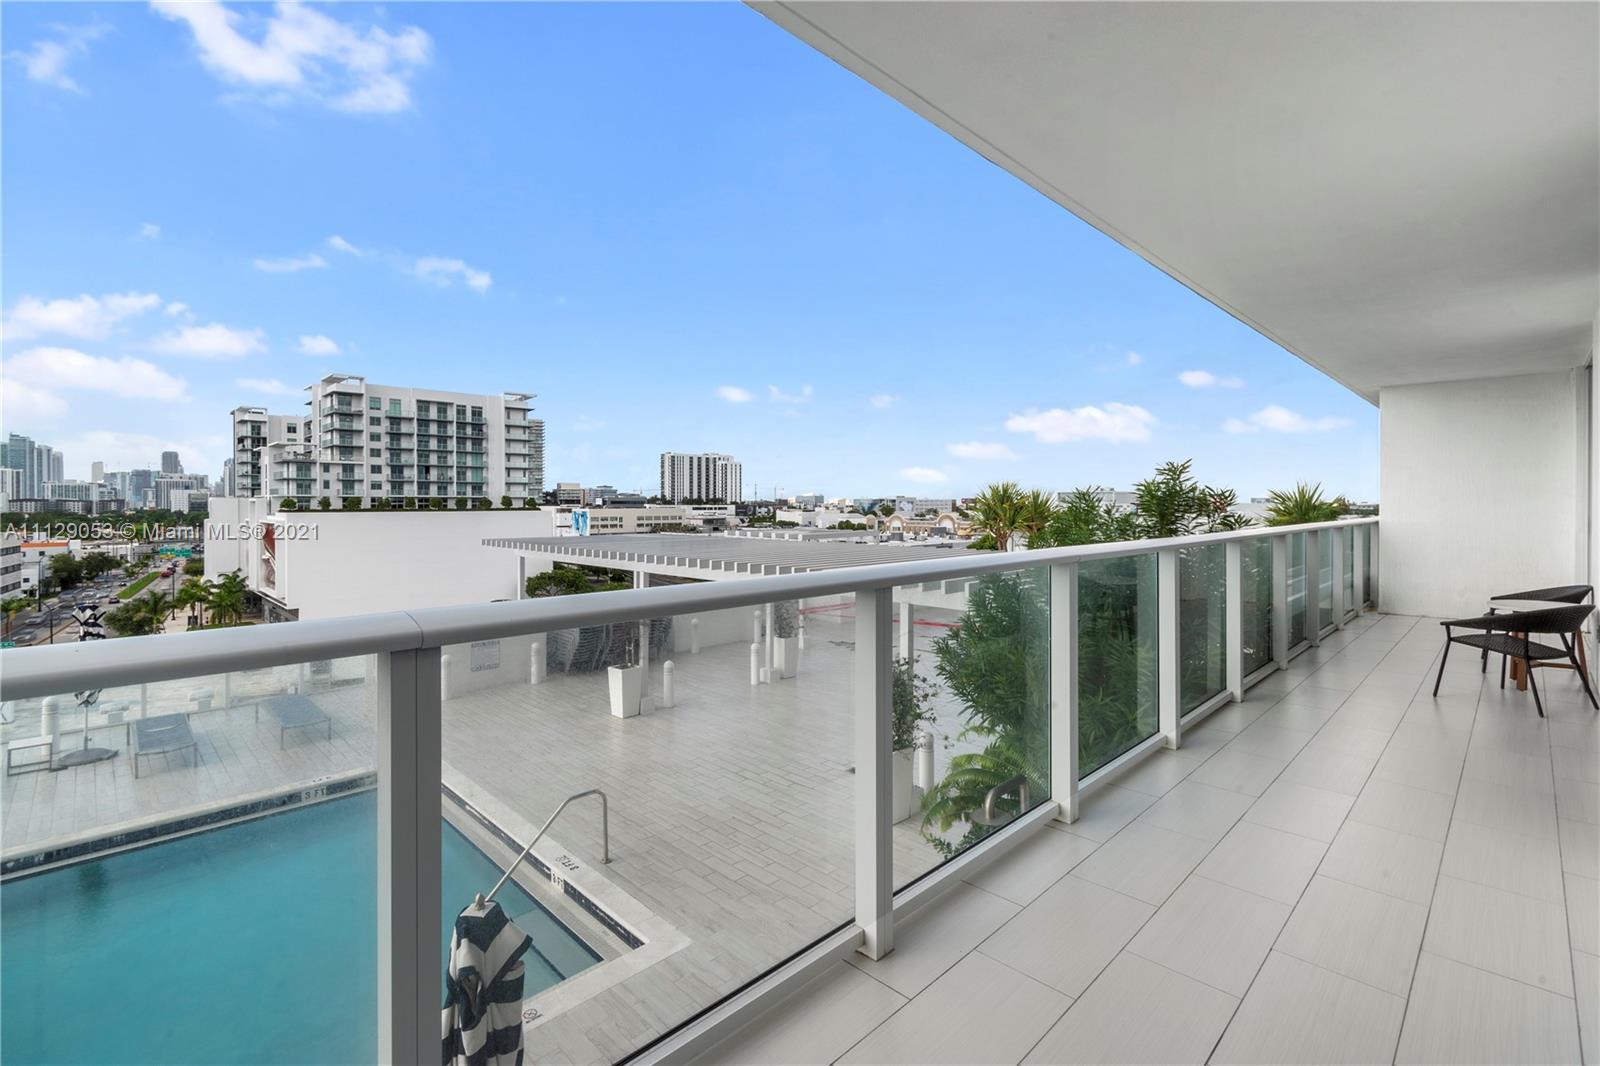 Great property in the heart of Miami.